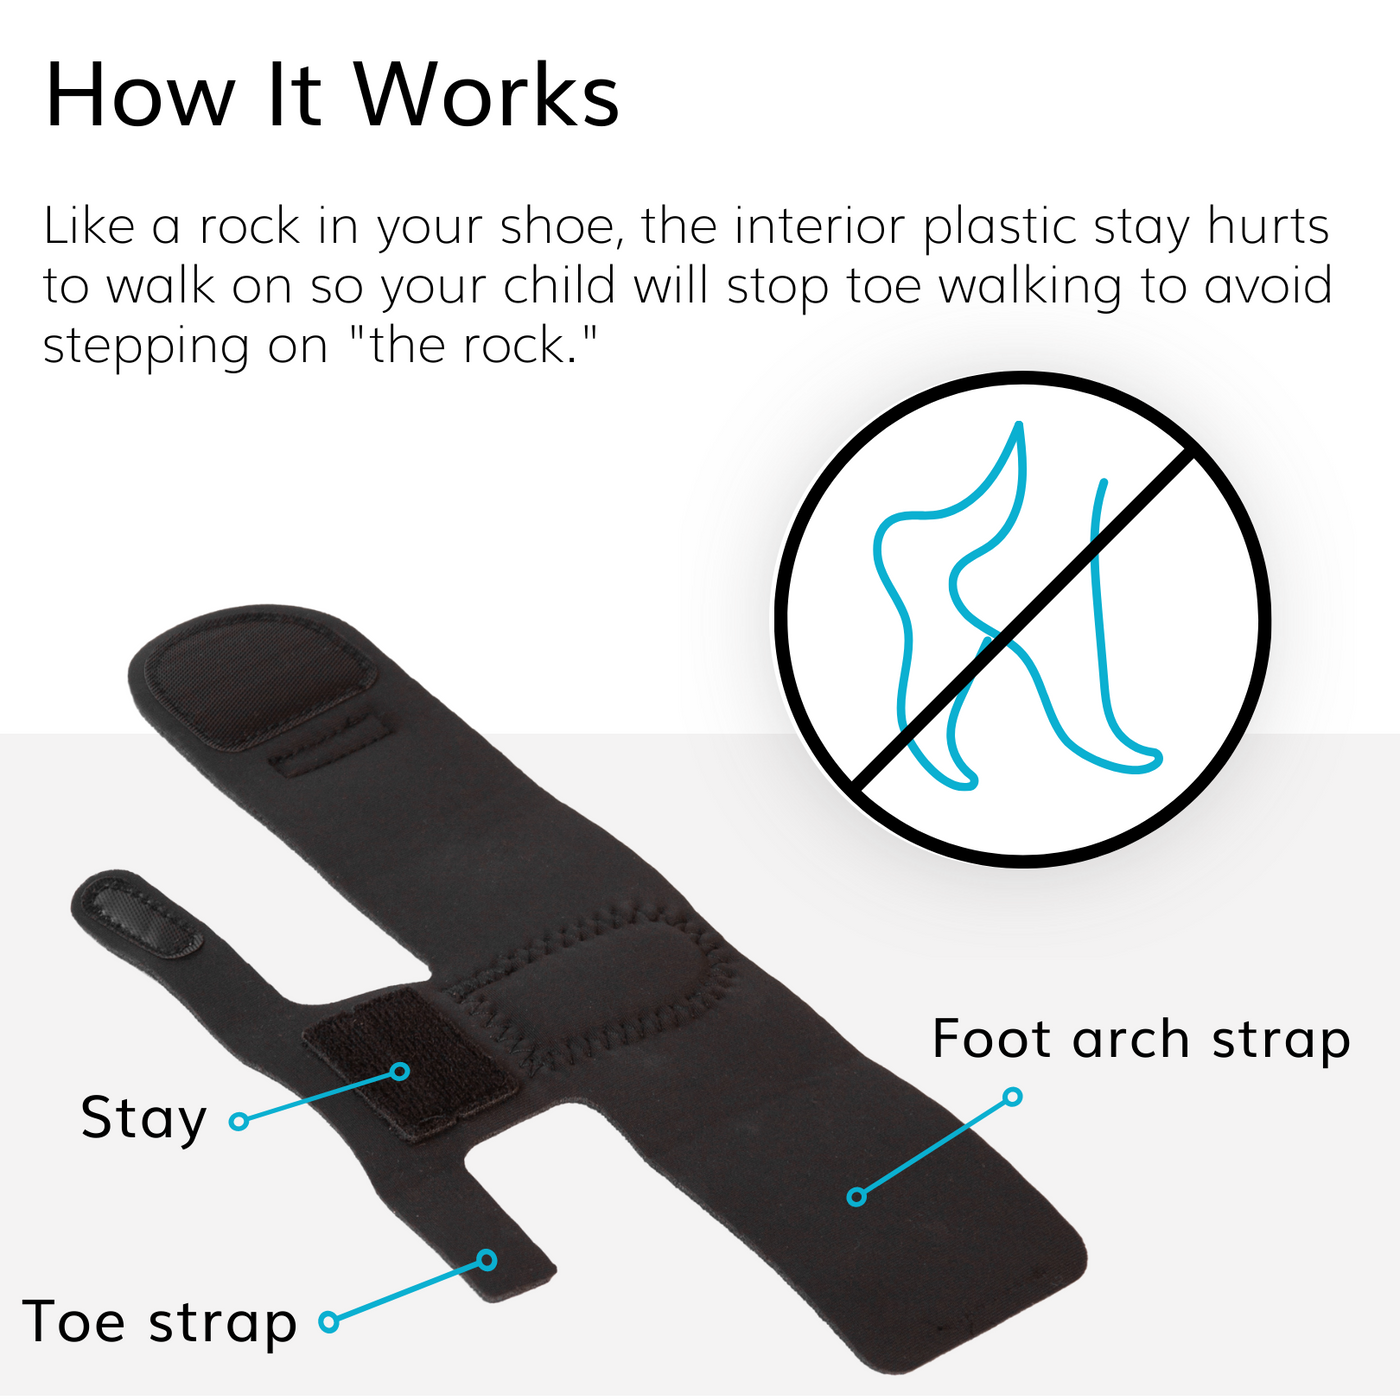 Our wrap for toe walking prevents children from going onto their toes using a plastic stay under the toes similar to having a rock in their shoe